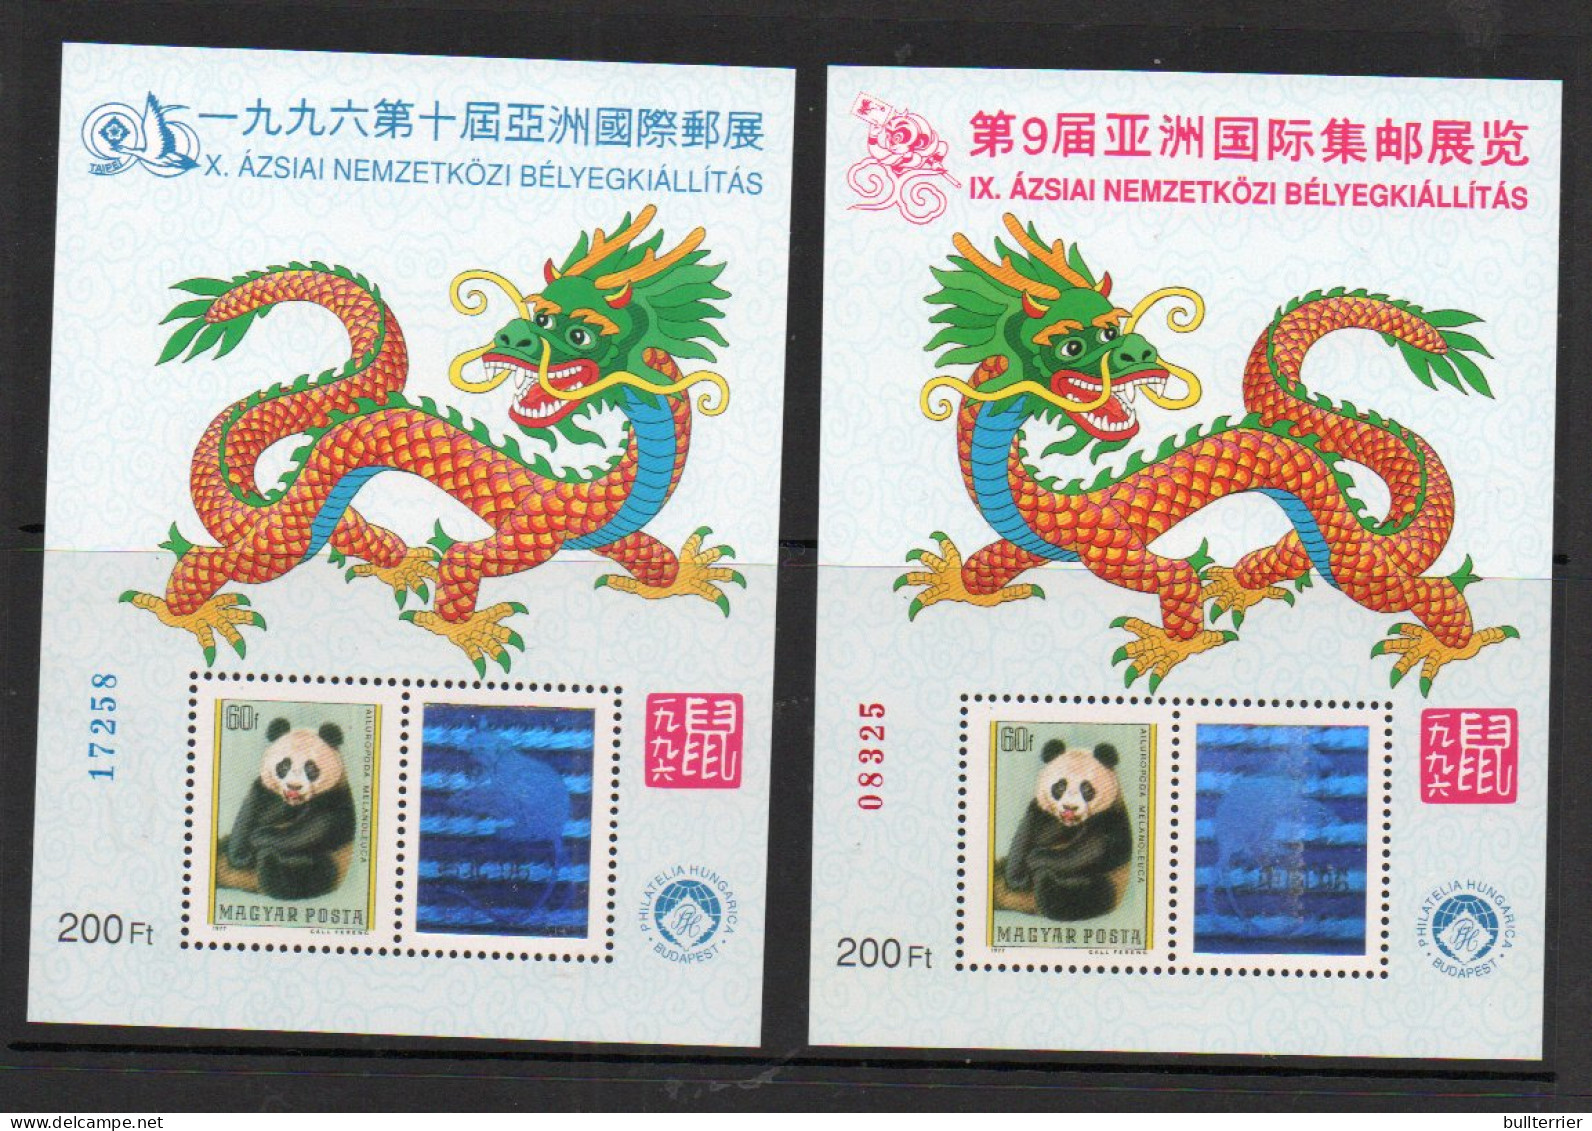 HOLOGRAMS - HUNGARY - TAIPEI /YEAR OF DRAGON /  HOLOGRAM S/SHEETS  MINT NEVER HINGED,  - Holograms